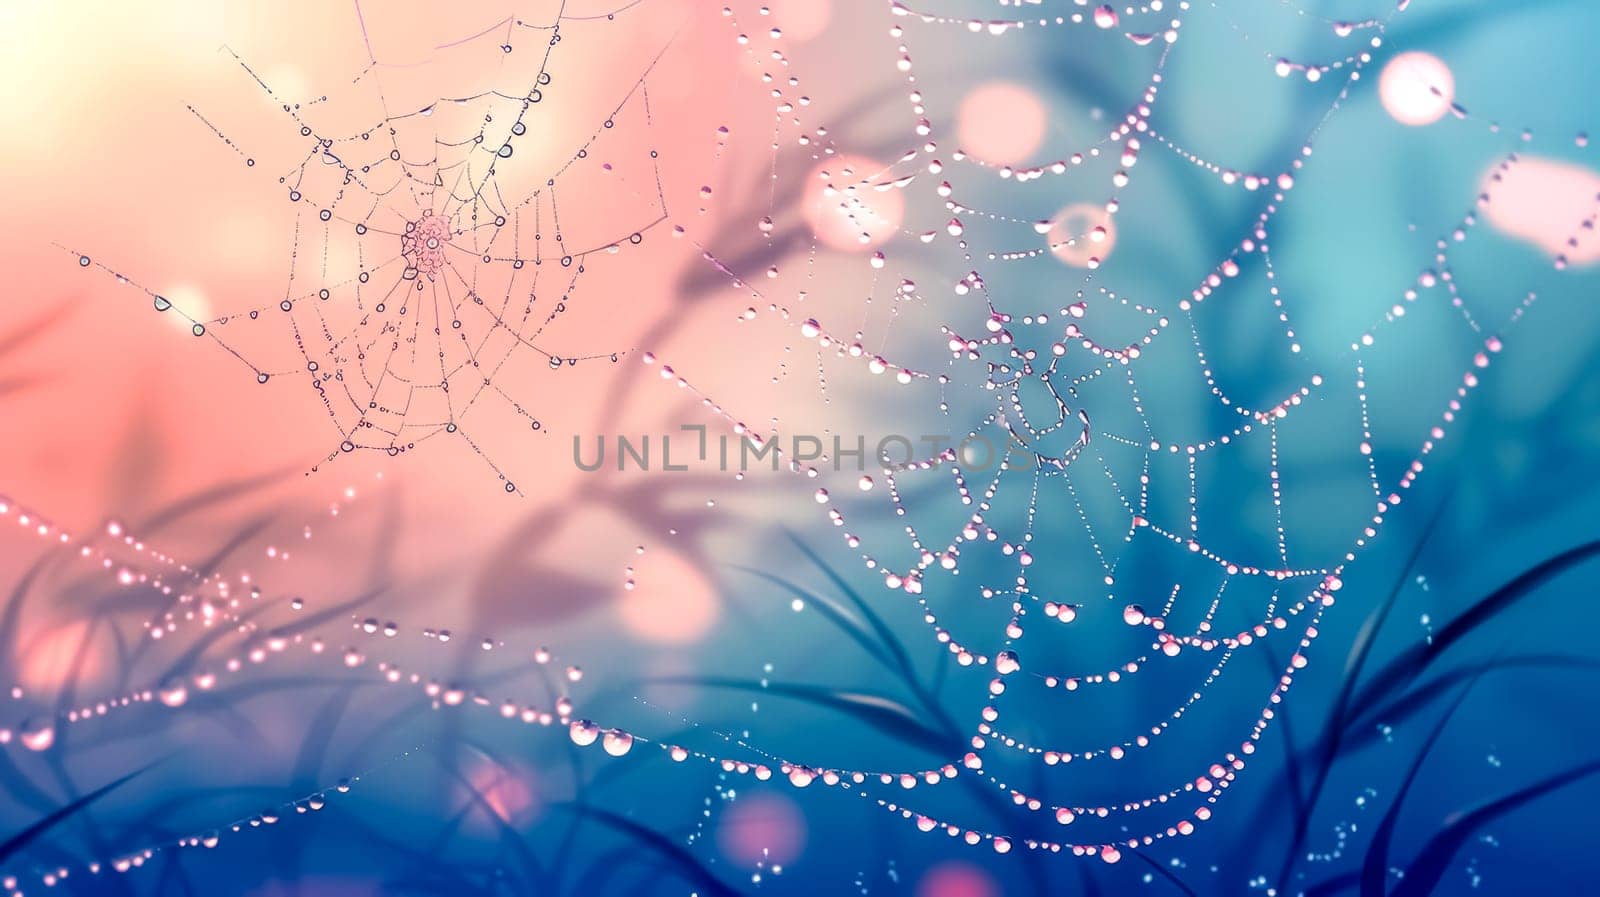 Close-up of a delicate spider web covered in morning dew, with a soft, colorful sunrise background